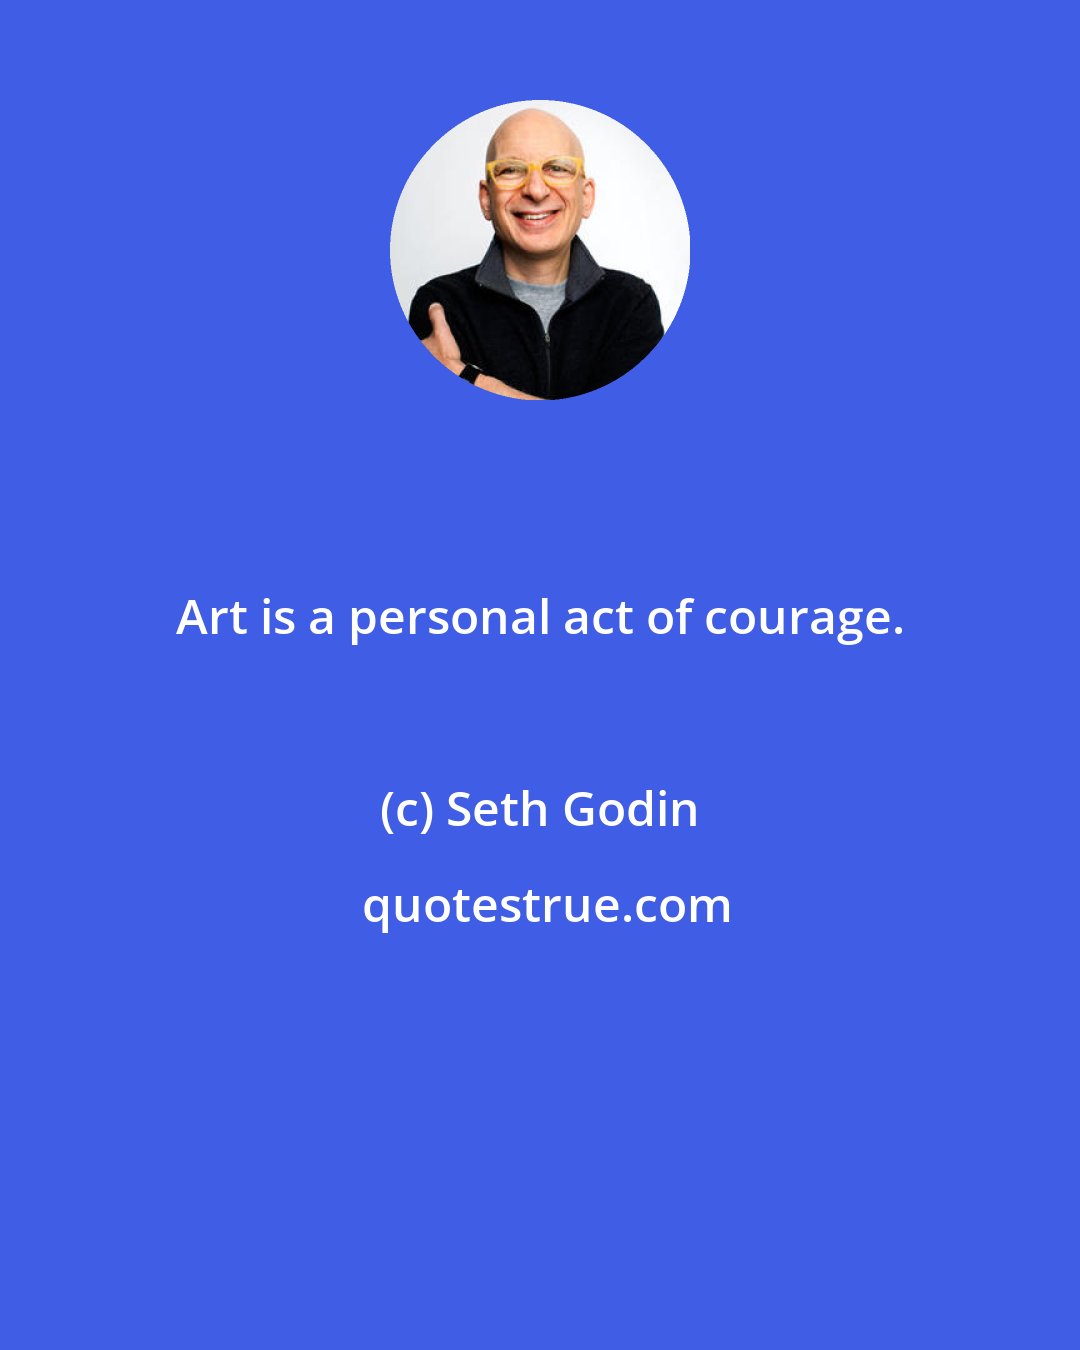 Seth Godin: Art is a personal act of courage.